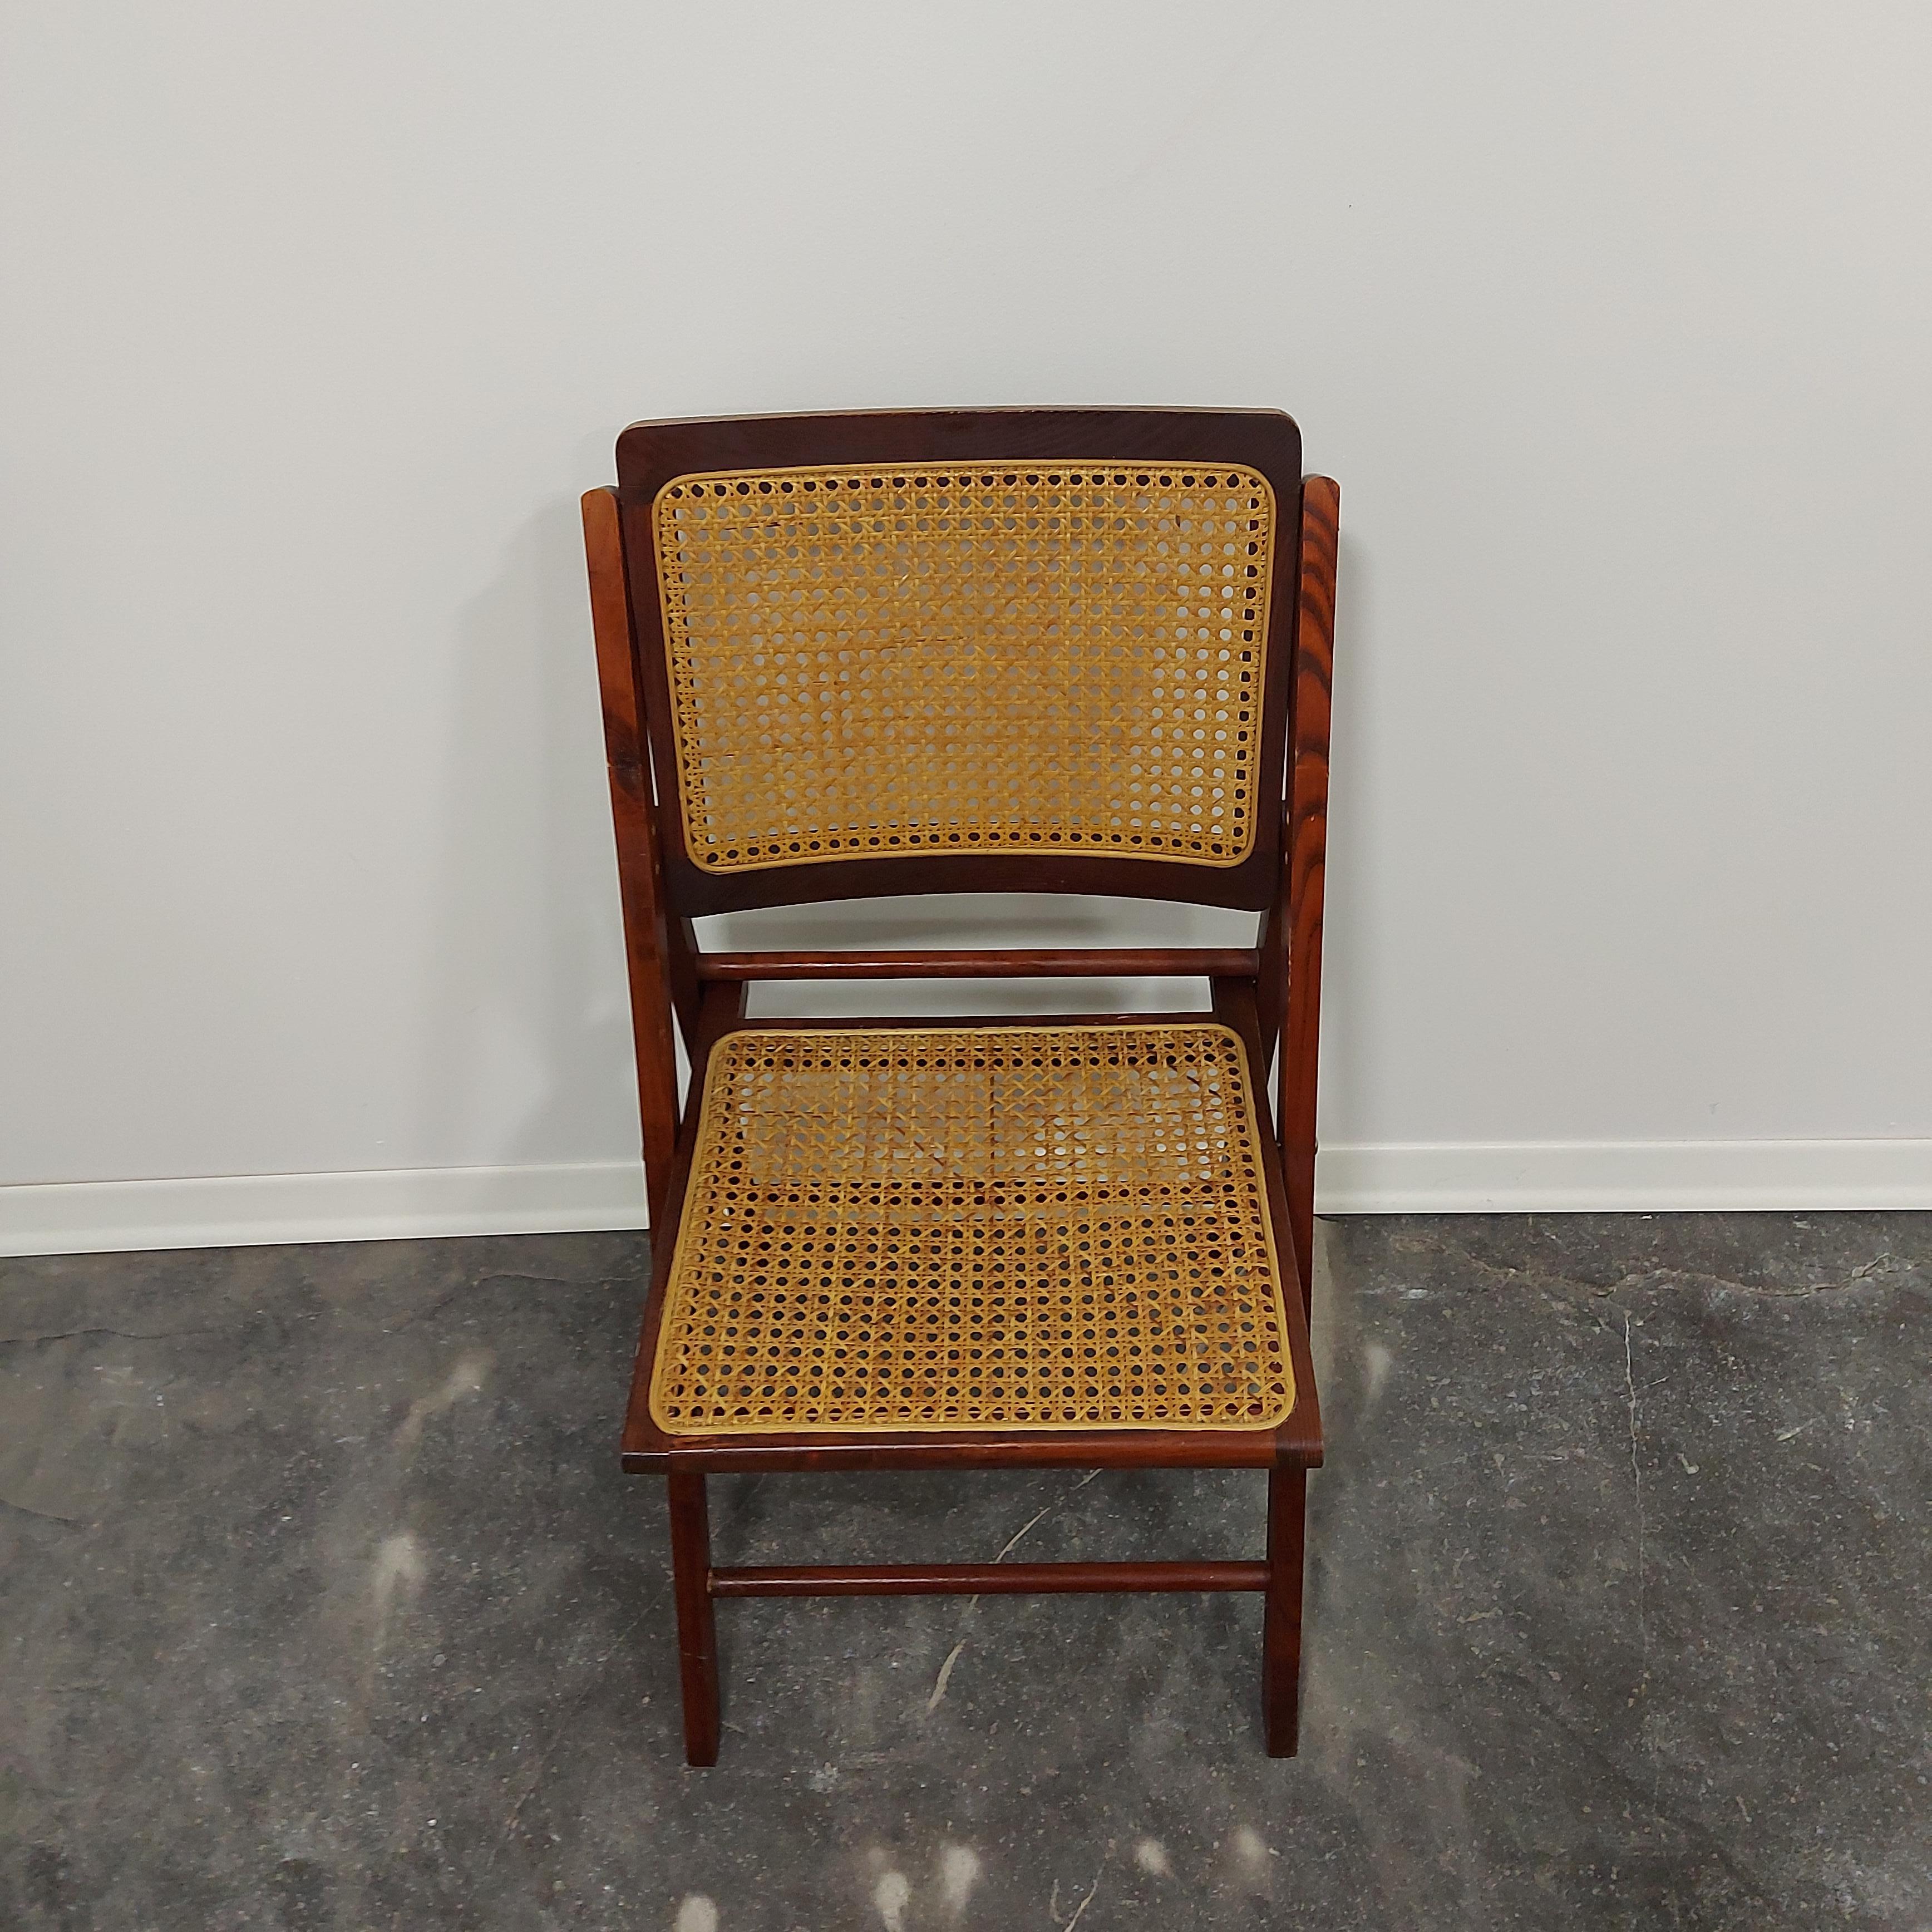 Folding chairs 1970s

Very confy to sit.

Made in Italy and beautifly crafted.